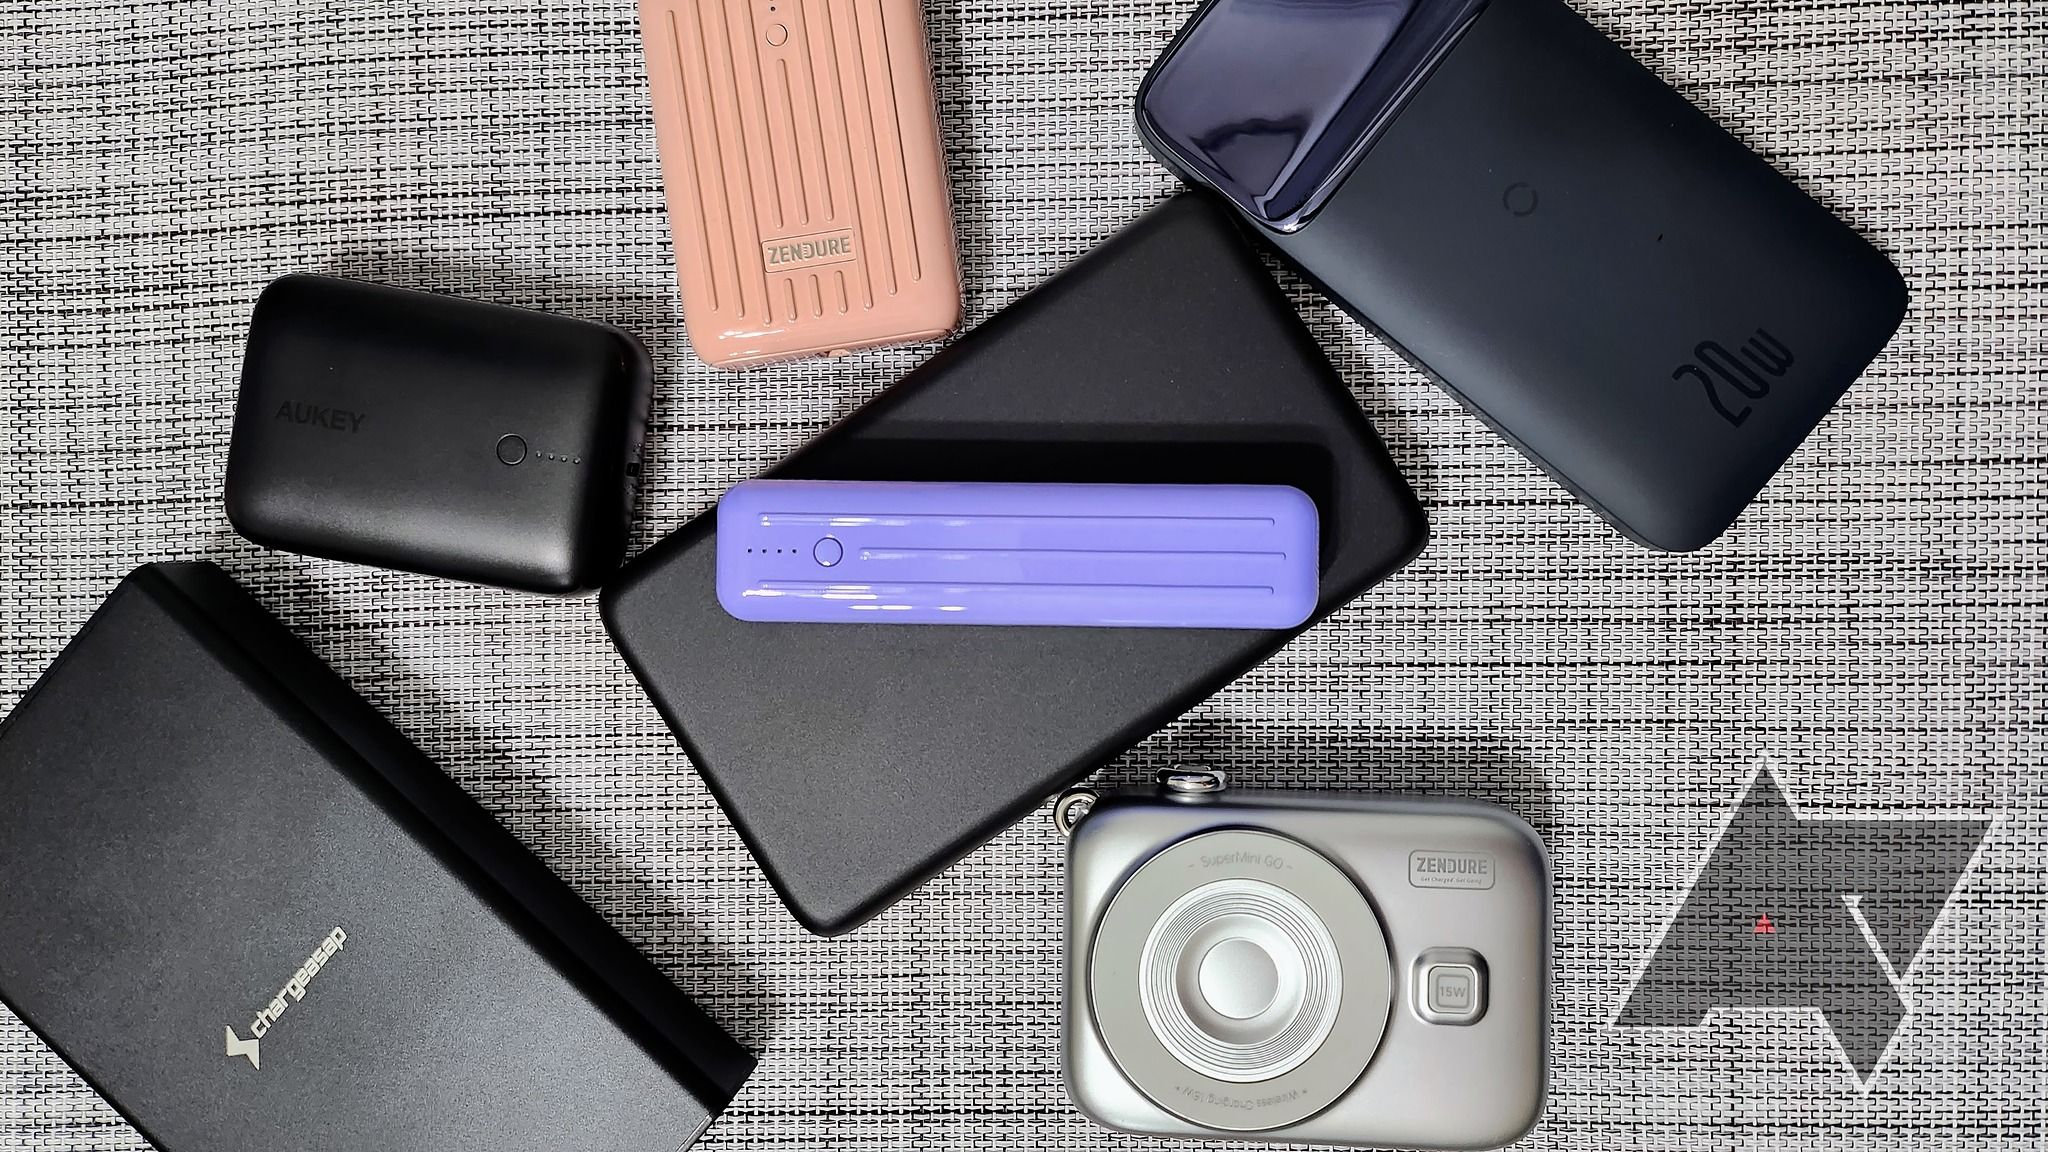 The best power banks for your phone in 2022: Anker, Zendure, Baseus and more